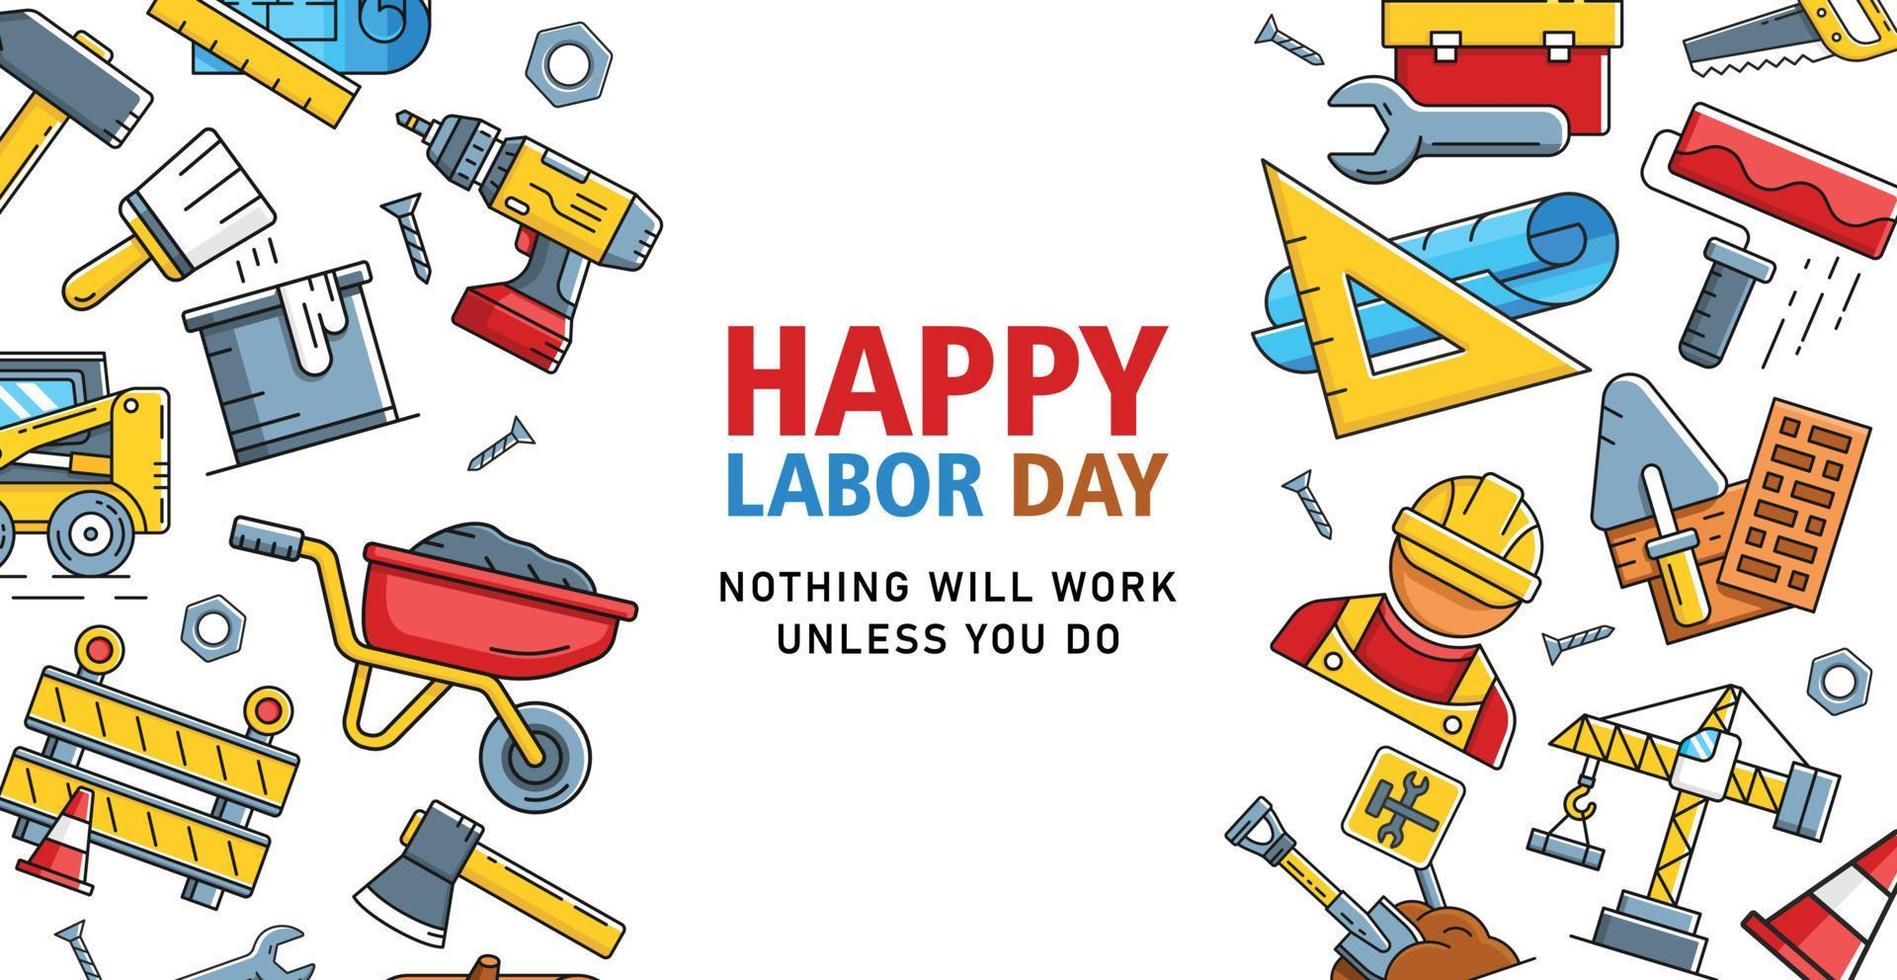 Happy labor day background and quotes with construction icons around. Suitable for poster, background, etc vector